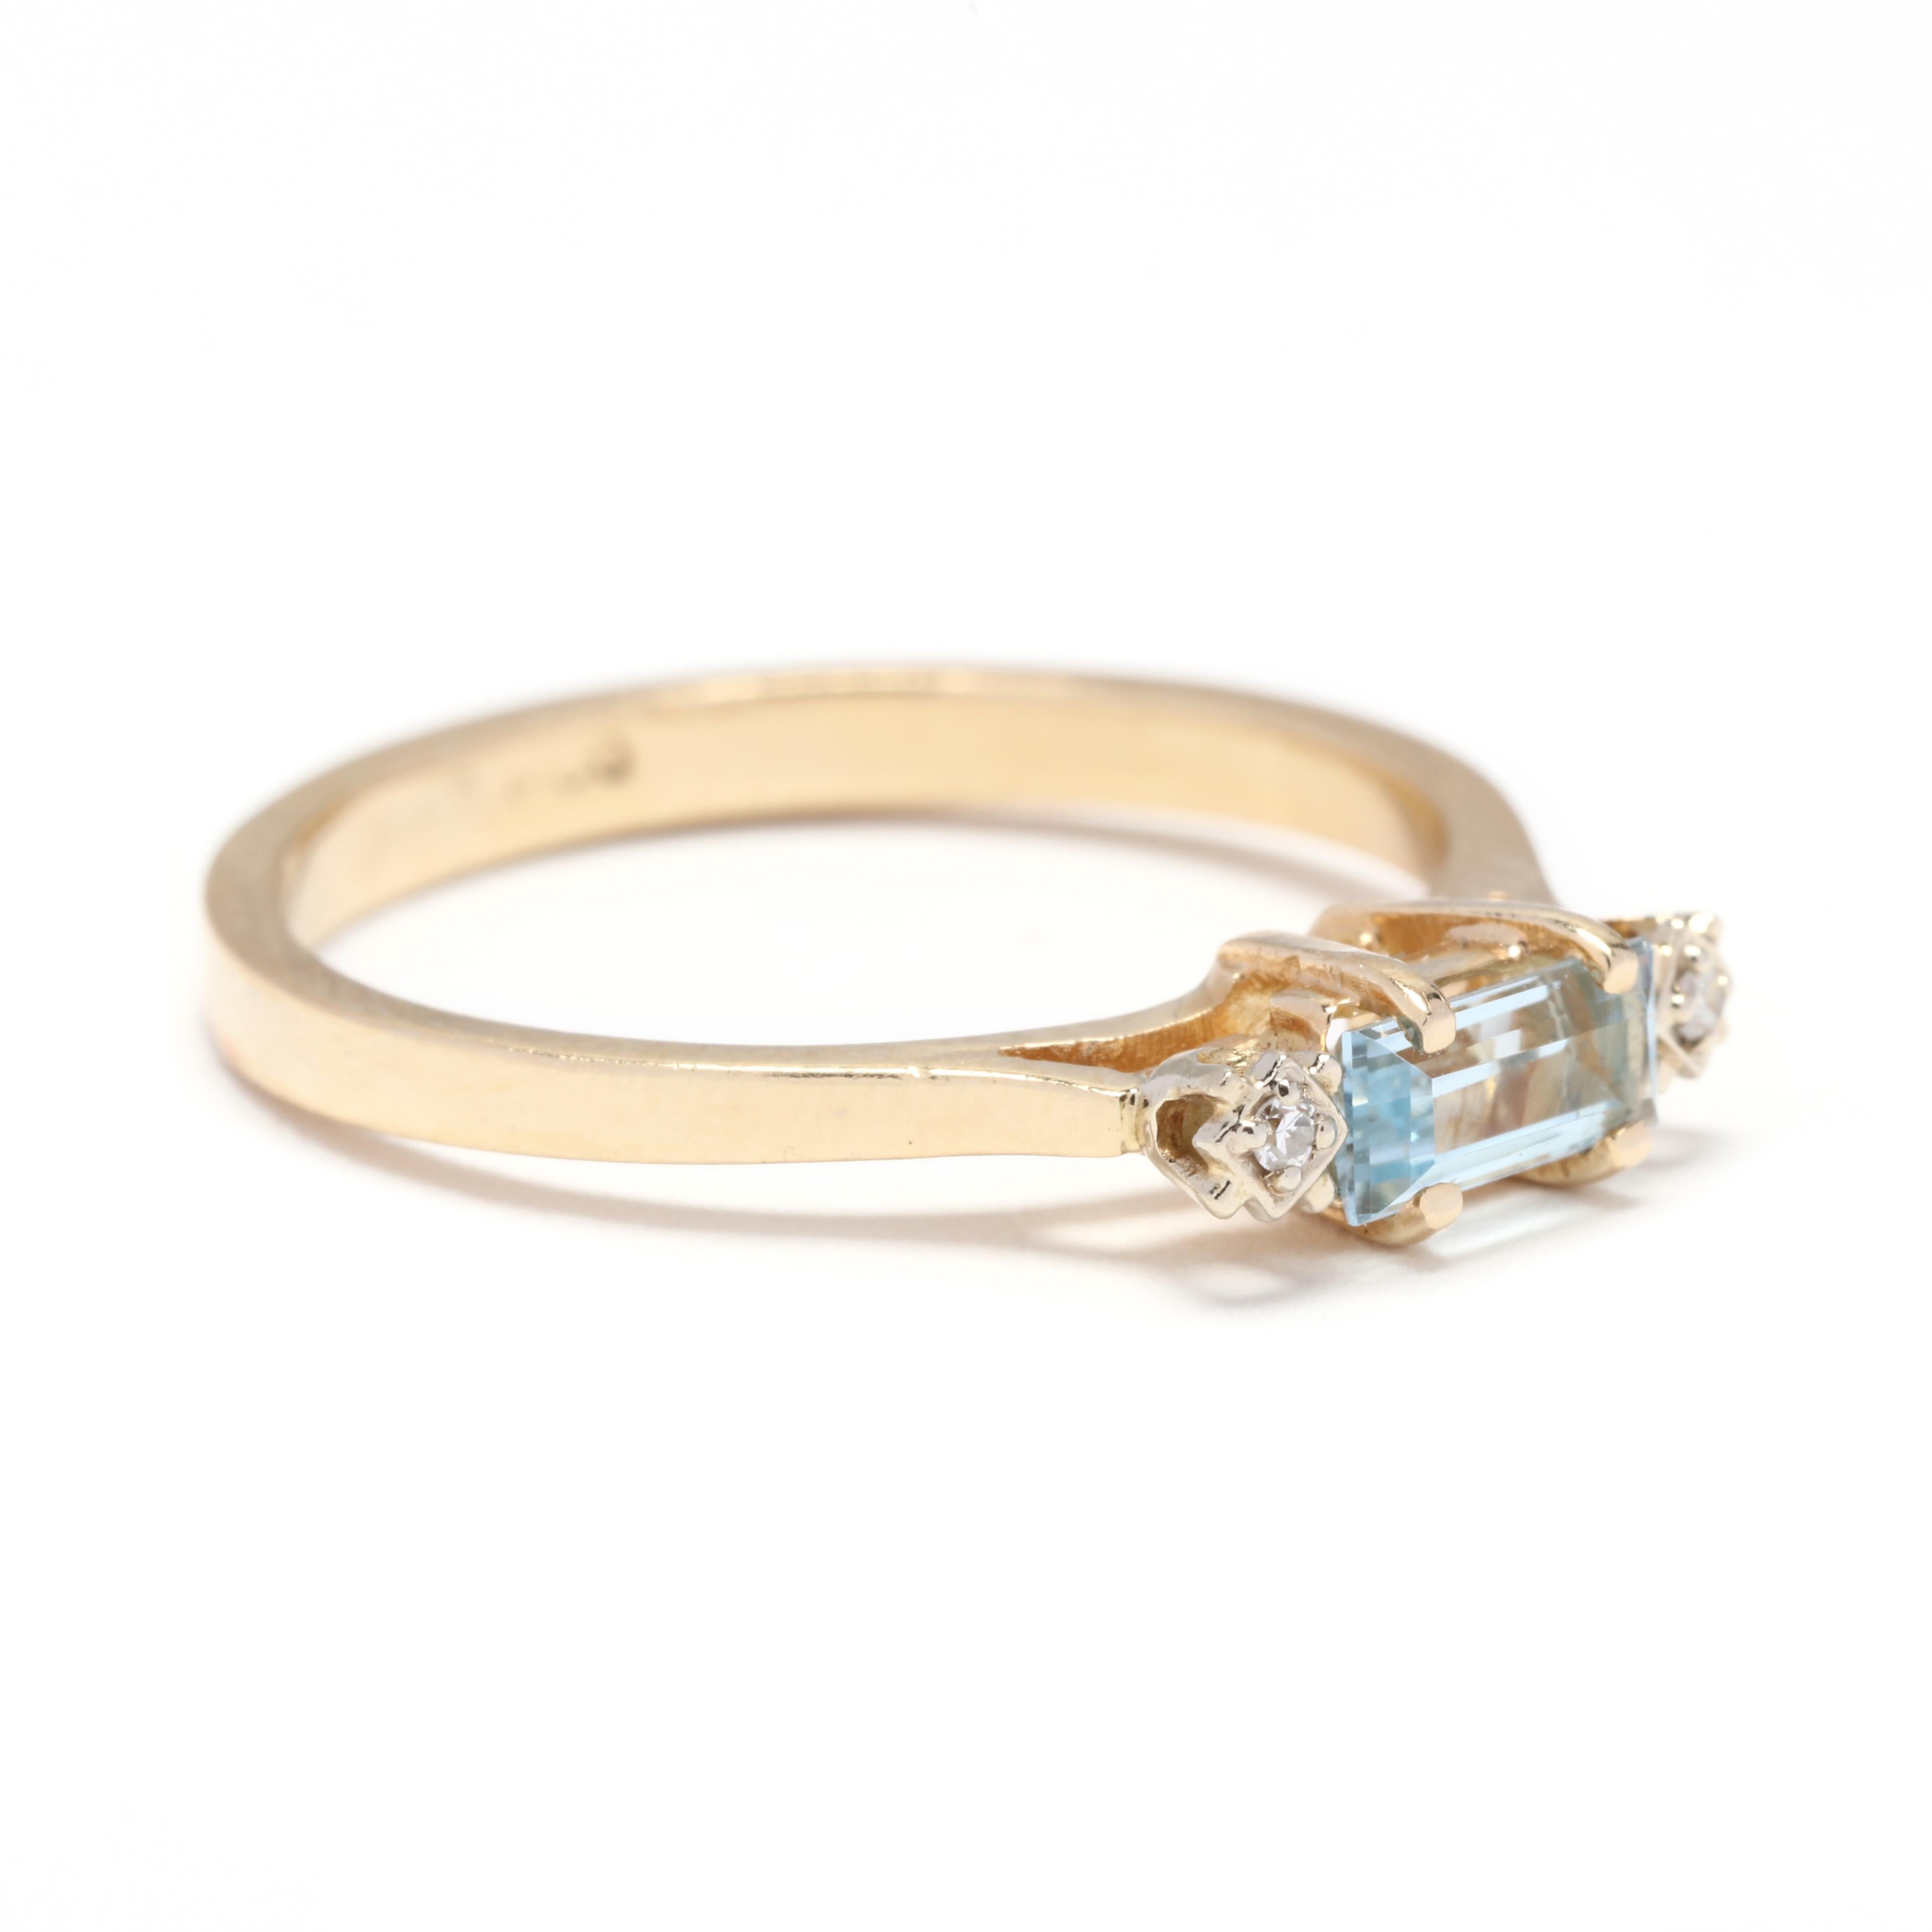 An 18 karat yellow gold, emerald cut blue topaz and diamond band ring. A horizontal ring with a prong set, emerald cut blue topaz weighing approximately .35 carat with a diamond on either side and a tapered band.

Stones:
- blue topaz, 1 stone
-